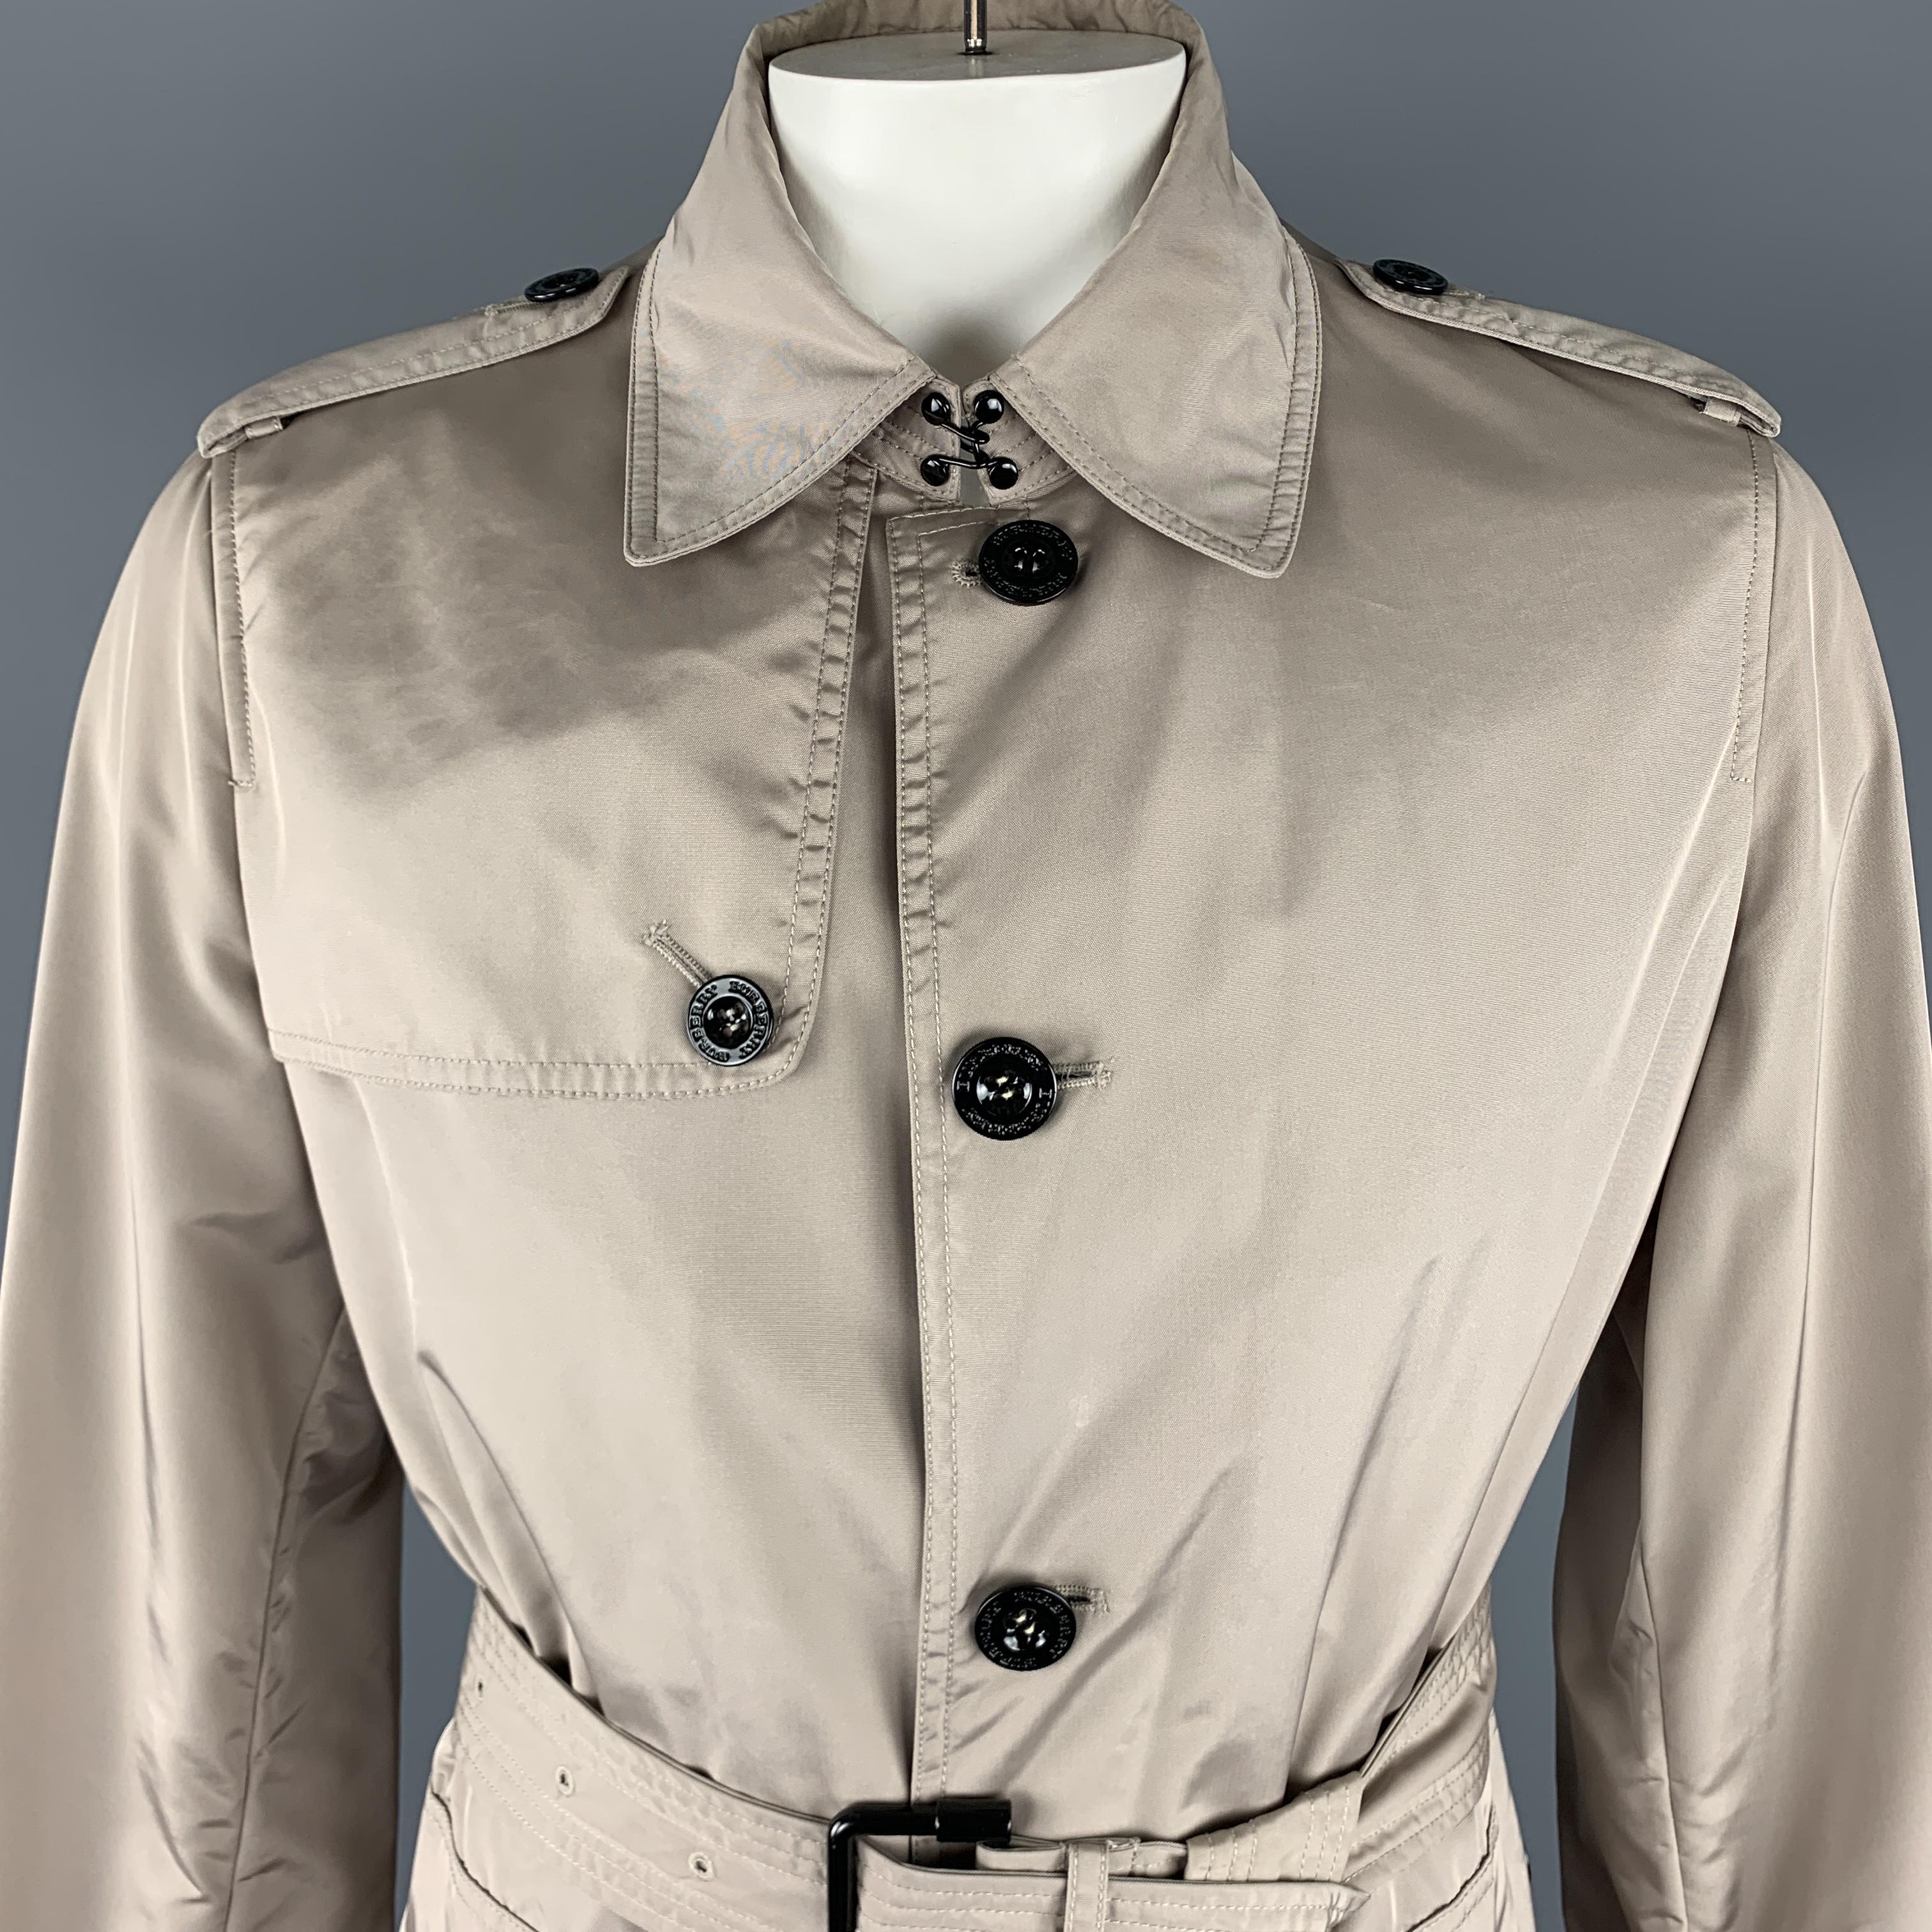 BURBERRY LONDON trenchcoat comes in a taupe tone in a solid nylon material, with a pointed collar, epaulettes, buttoned front, single breasted, belted cuffs and waist, patch pockets and a single vent at back, unlined. Includes the original garment